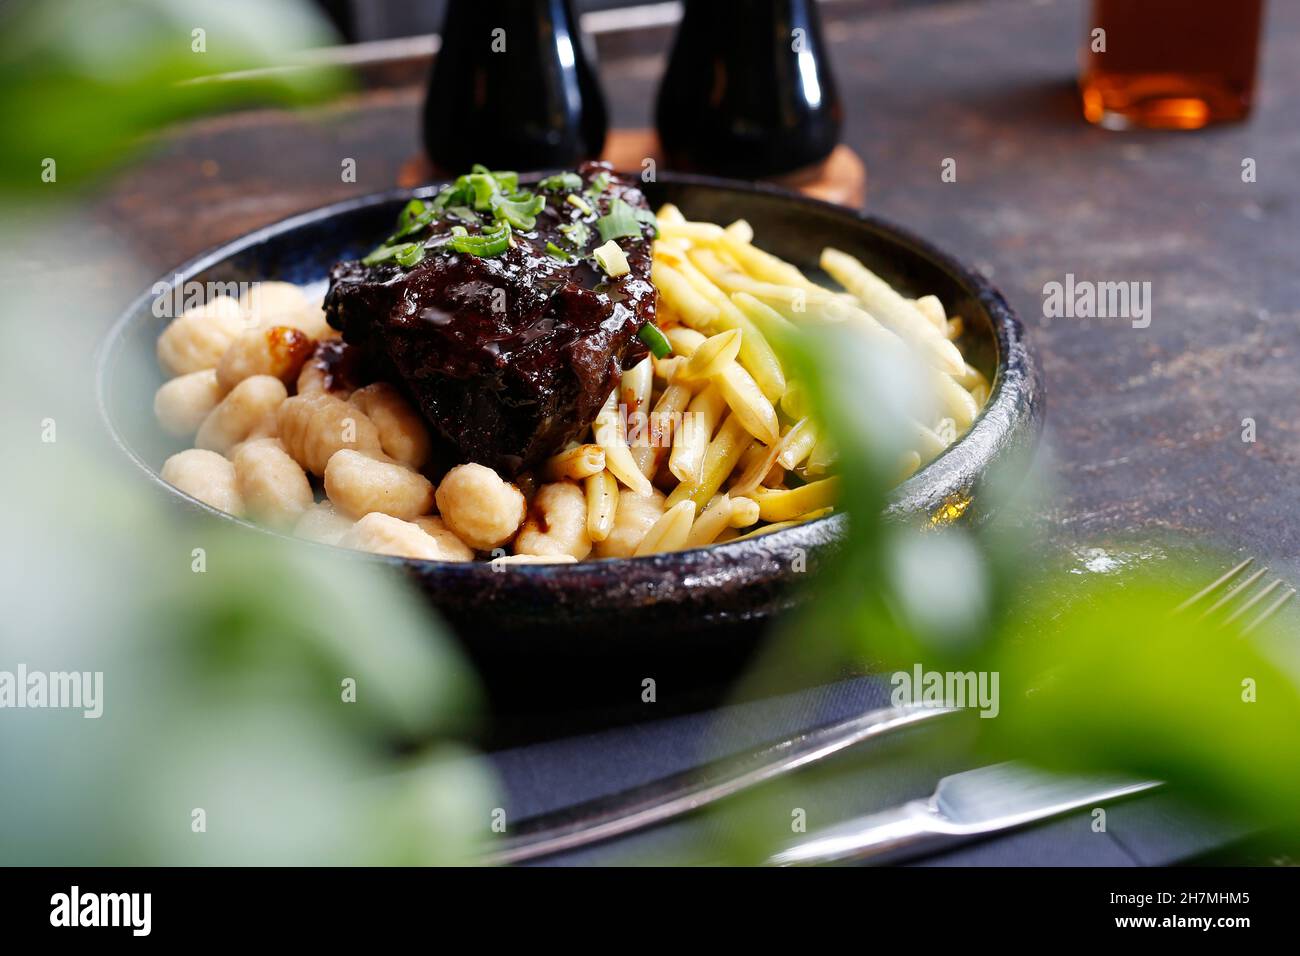 Roasted meat in bbq sauce with fries, and gnocchi. A tasty dish.Culinary photography. Suggestion to serve the dish. Stock Photo